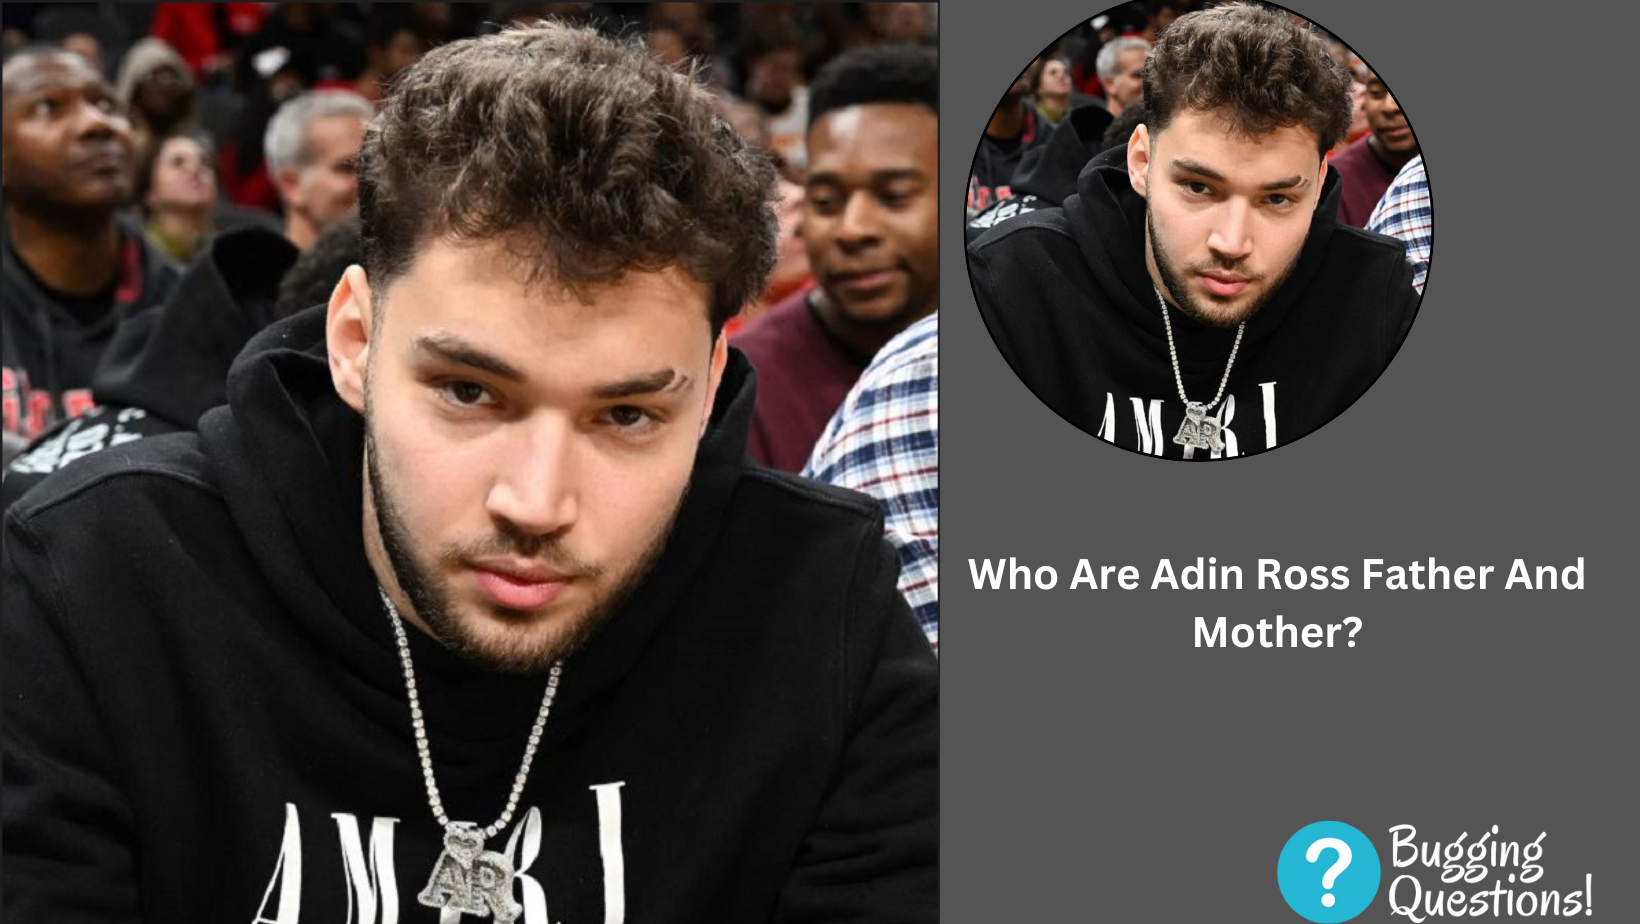 Who Are Adin Ross Father And Mother?